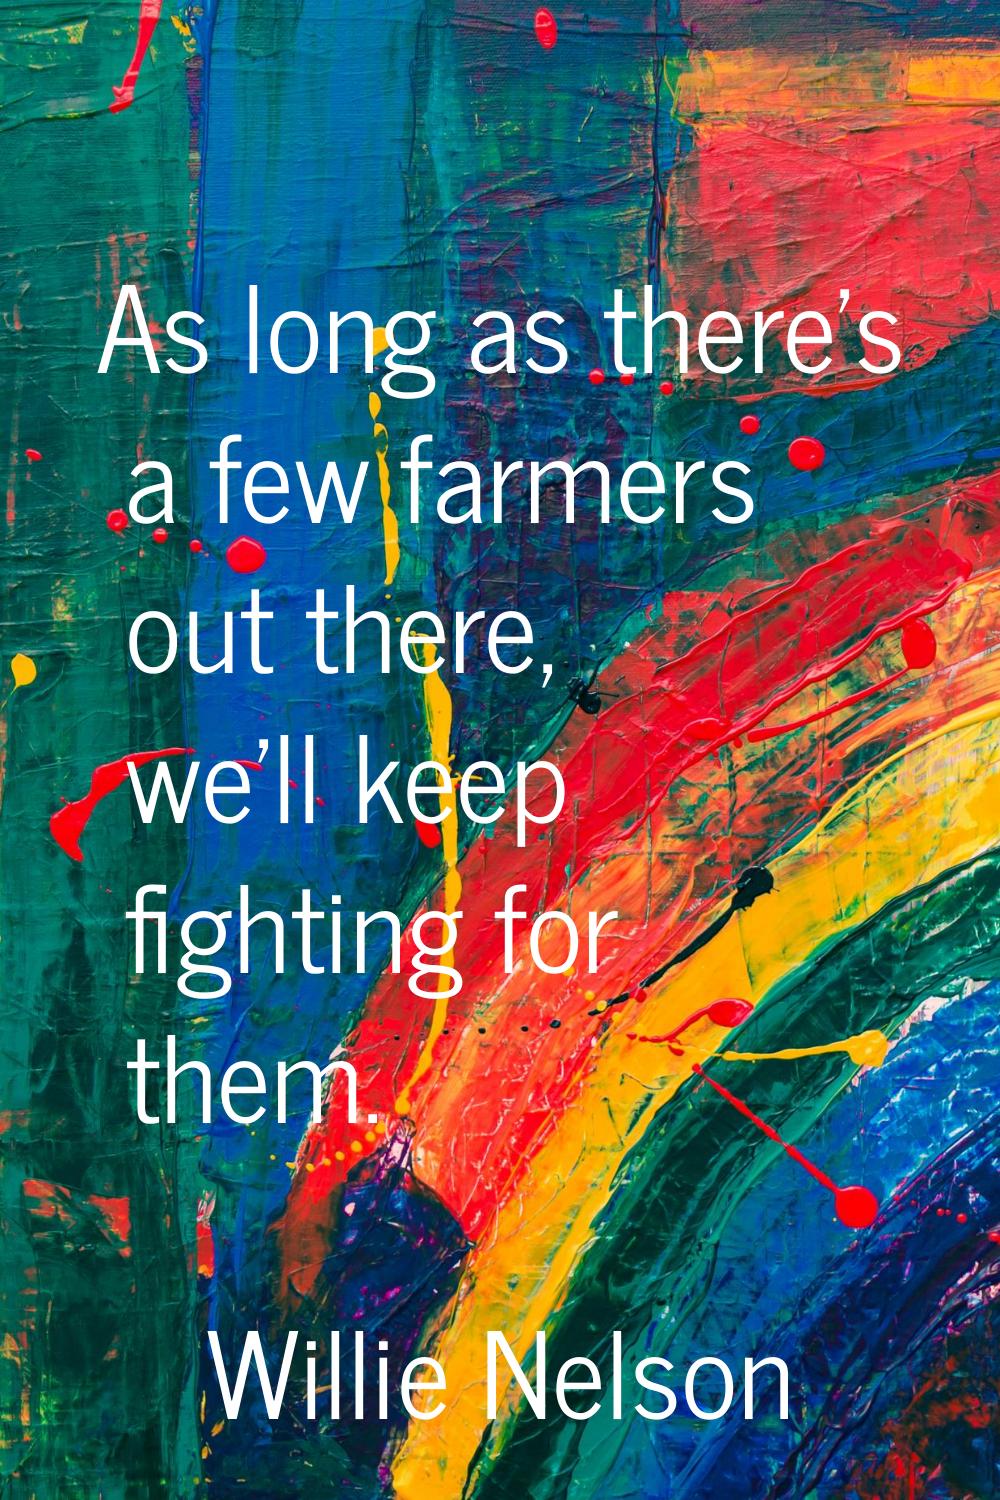 As long as there's a few farmers out there, we'll keep fighting for them.